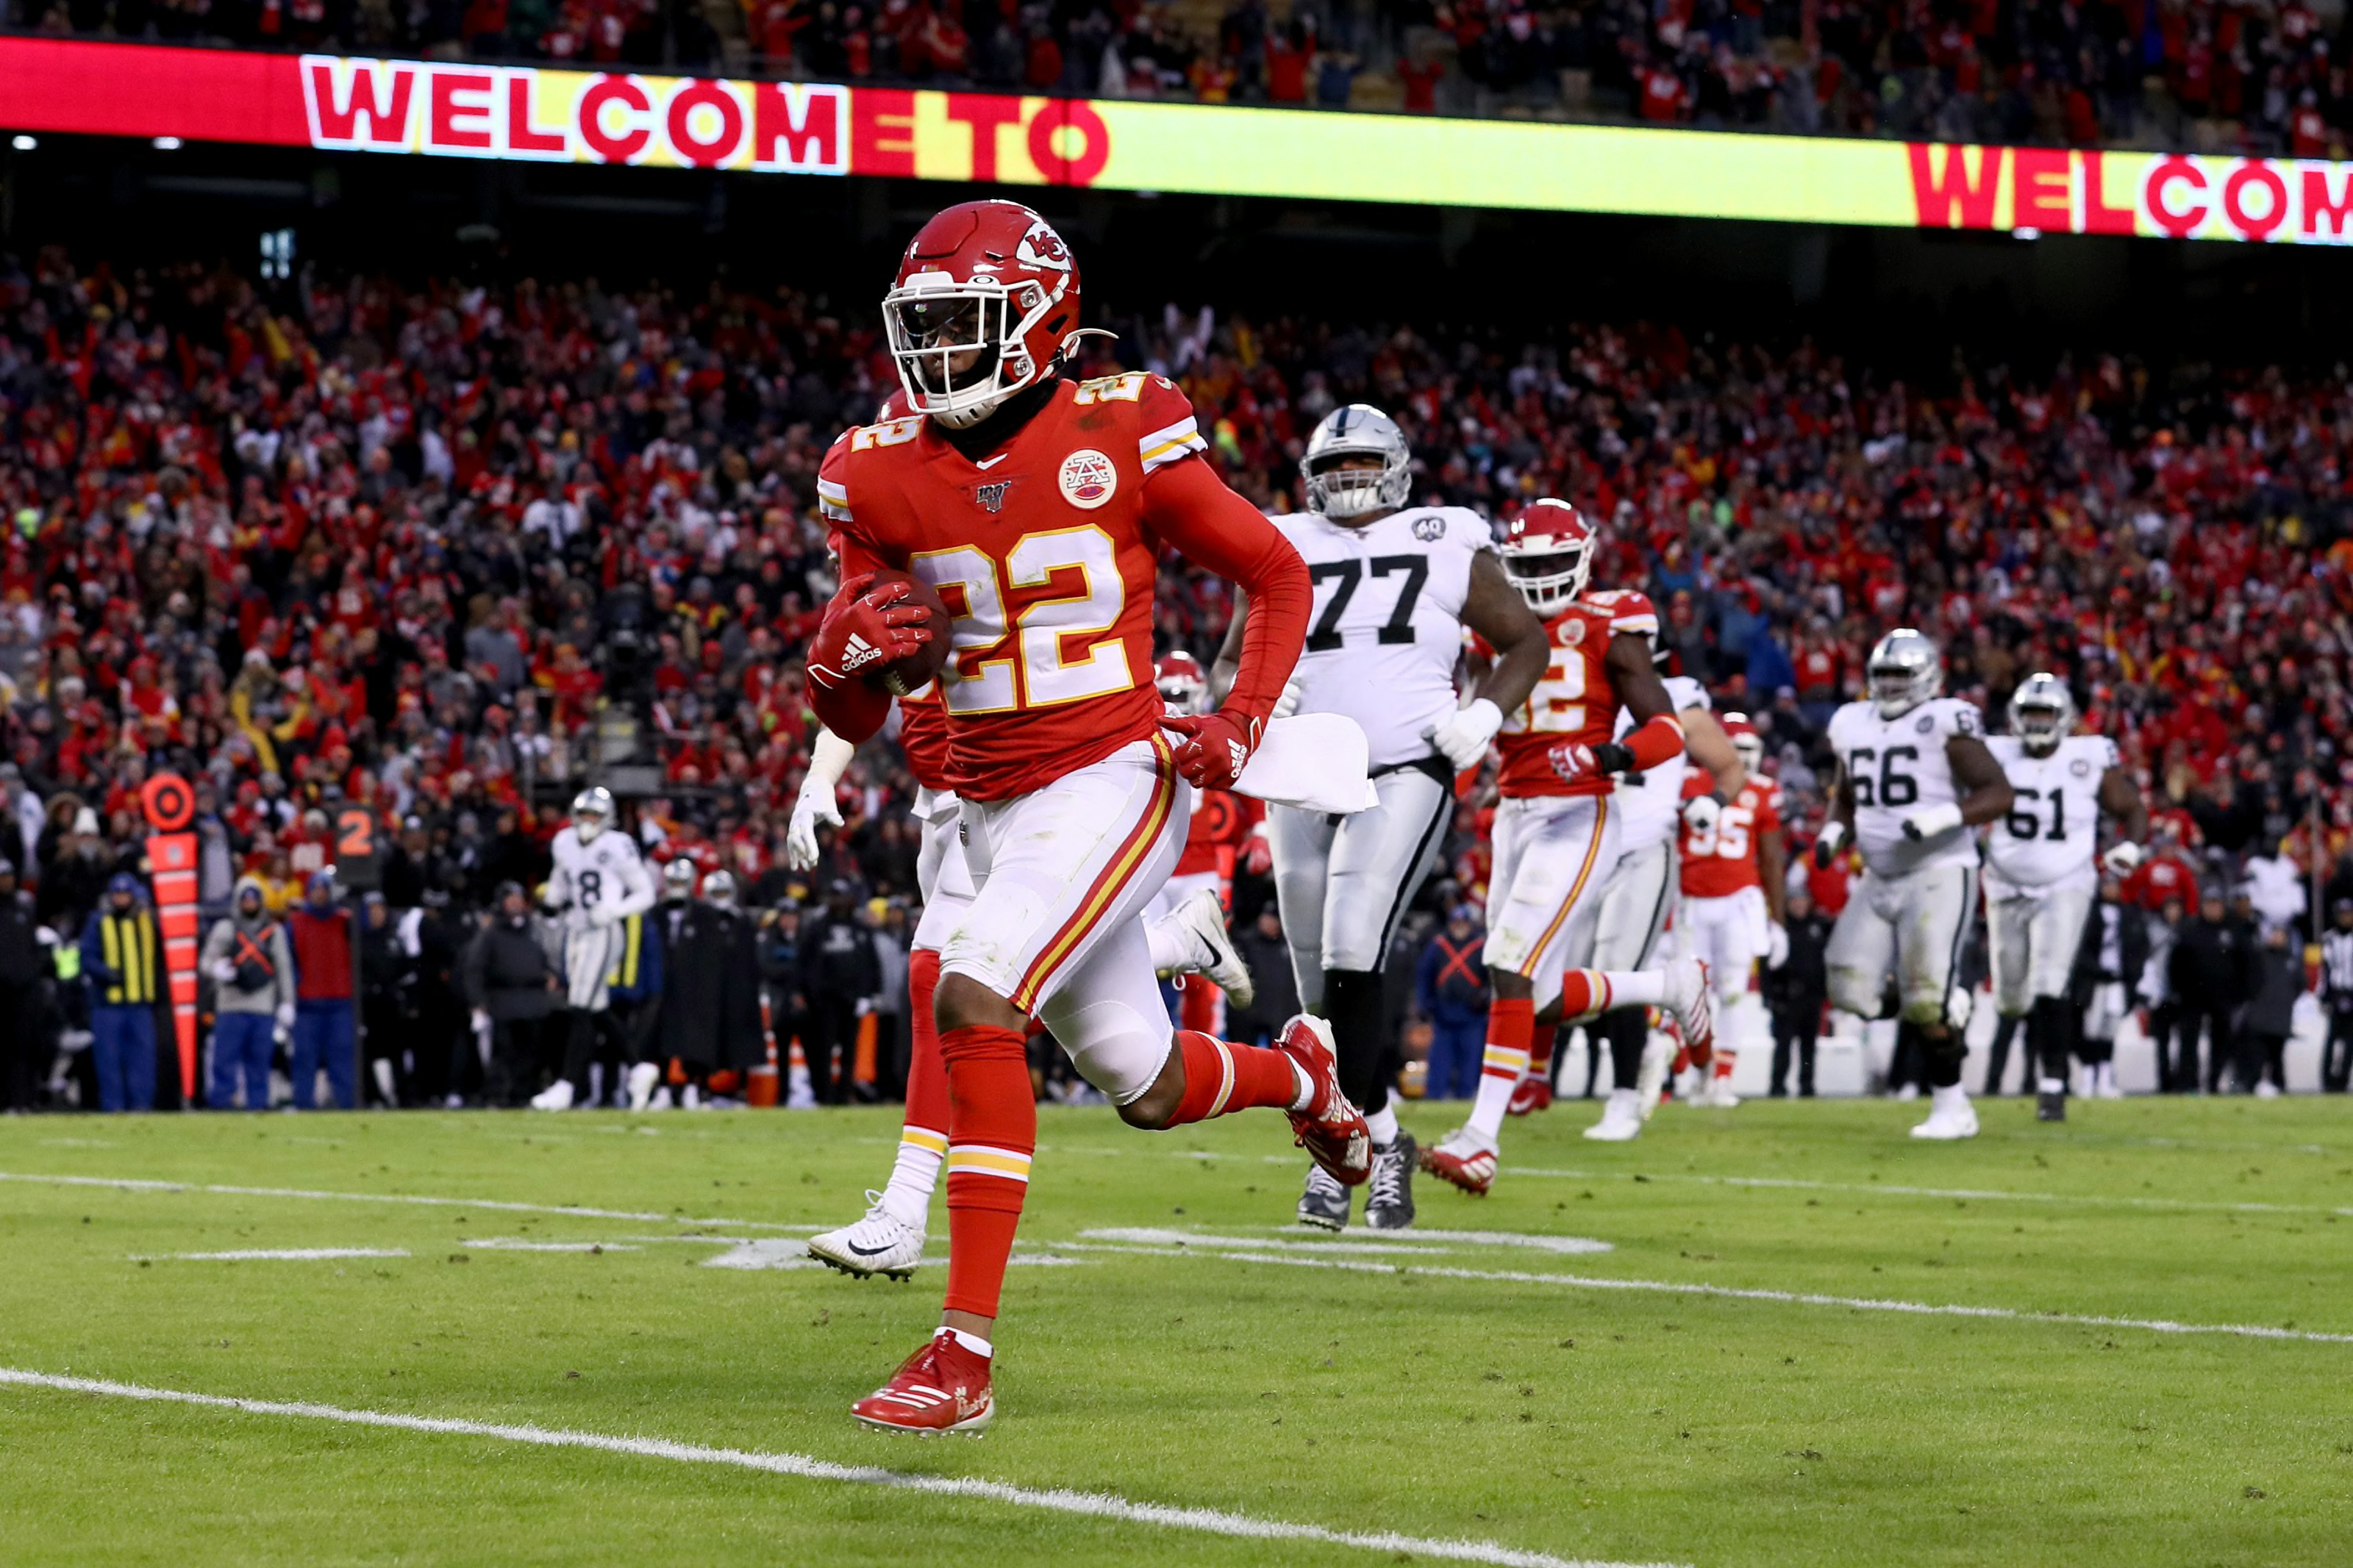 The biggest benefits of the bye week for the Kansas City Chiefs